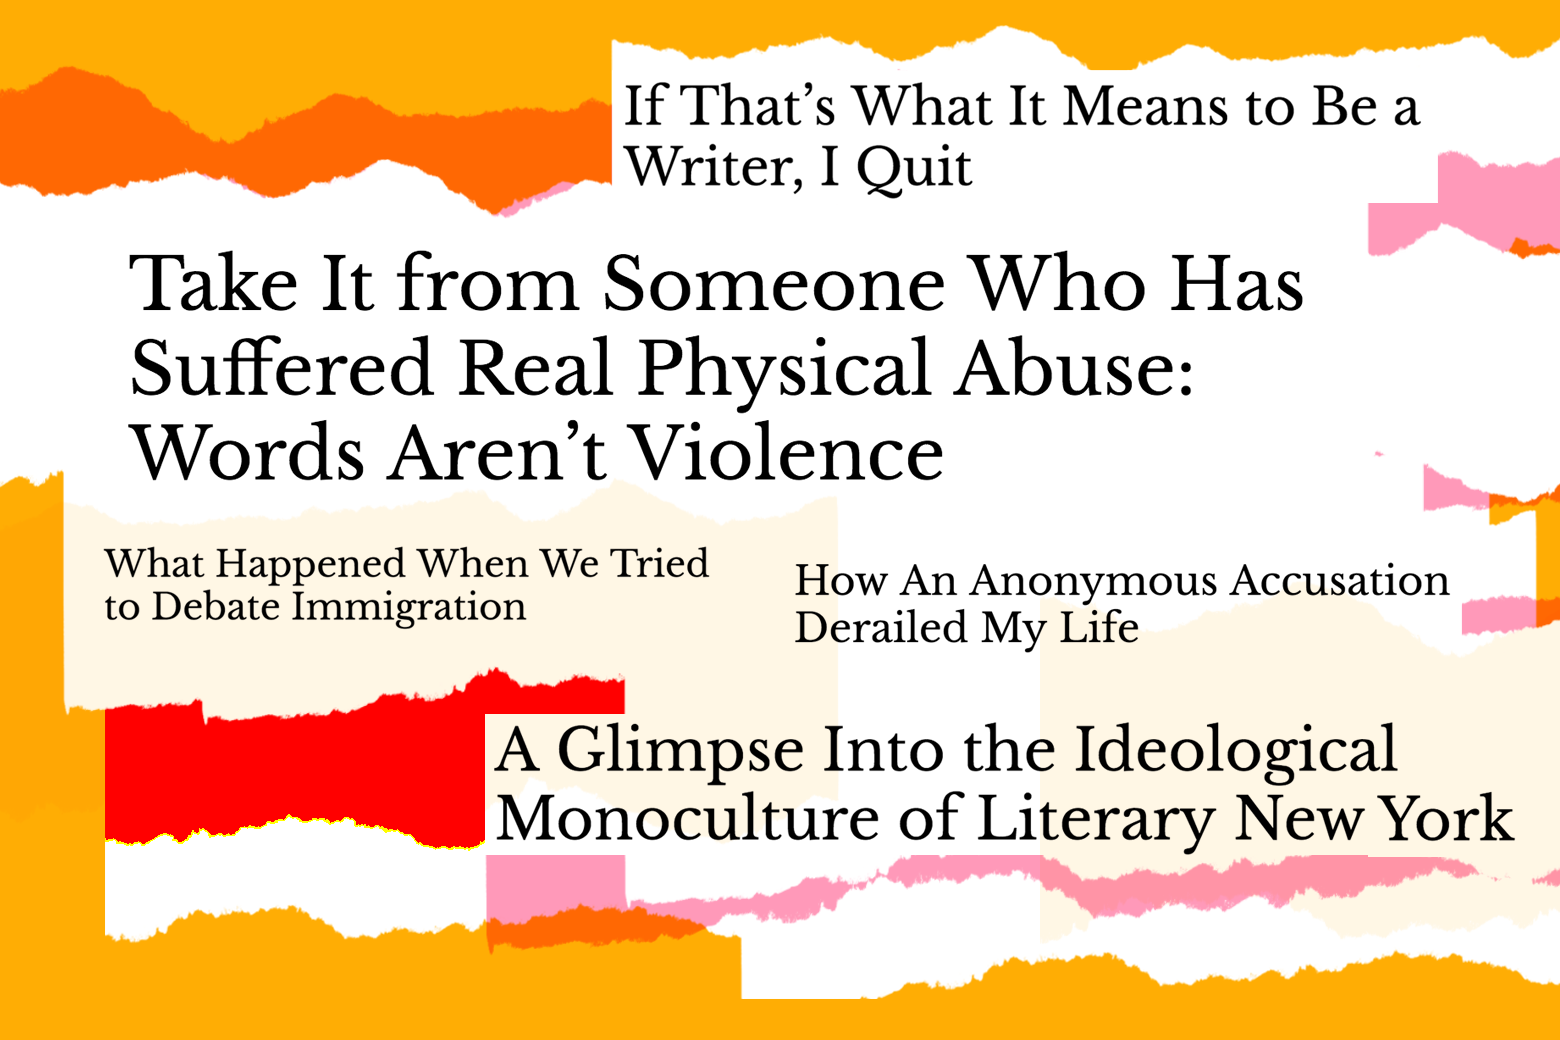 Various headlines from Quillette.